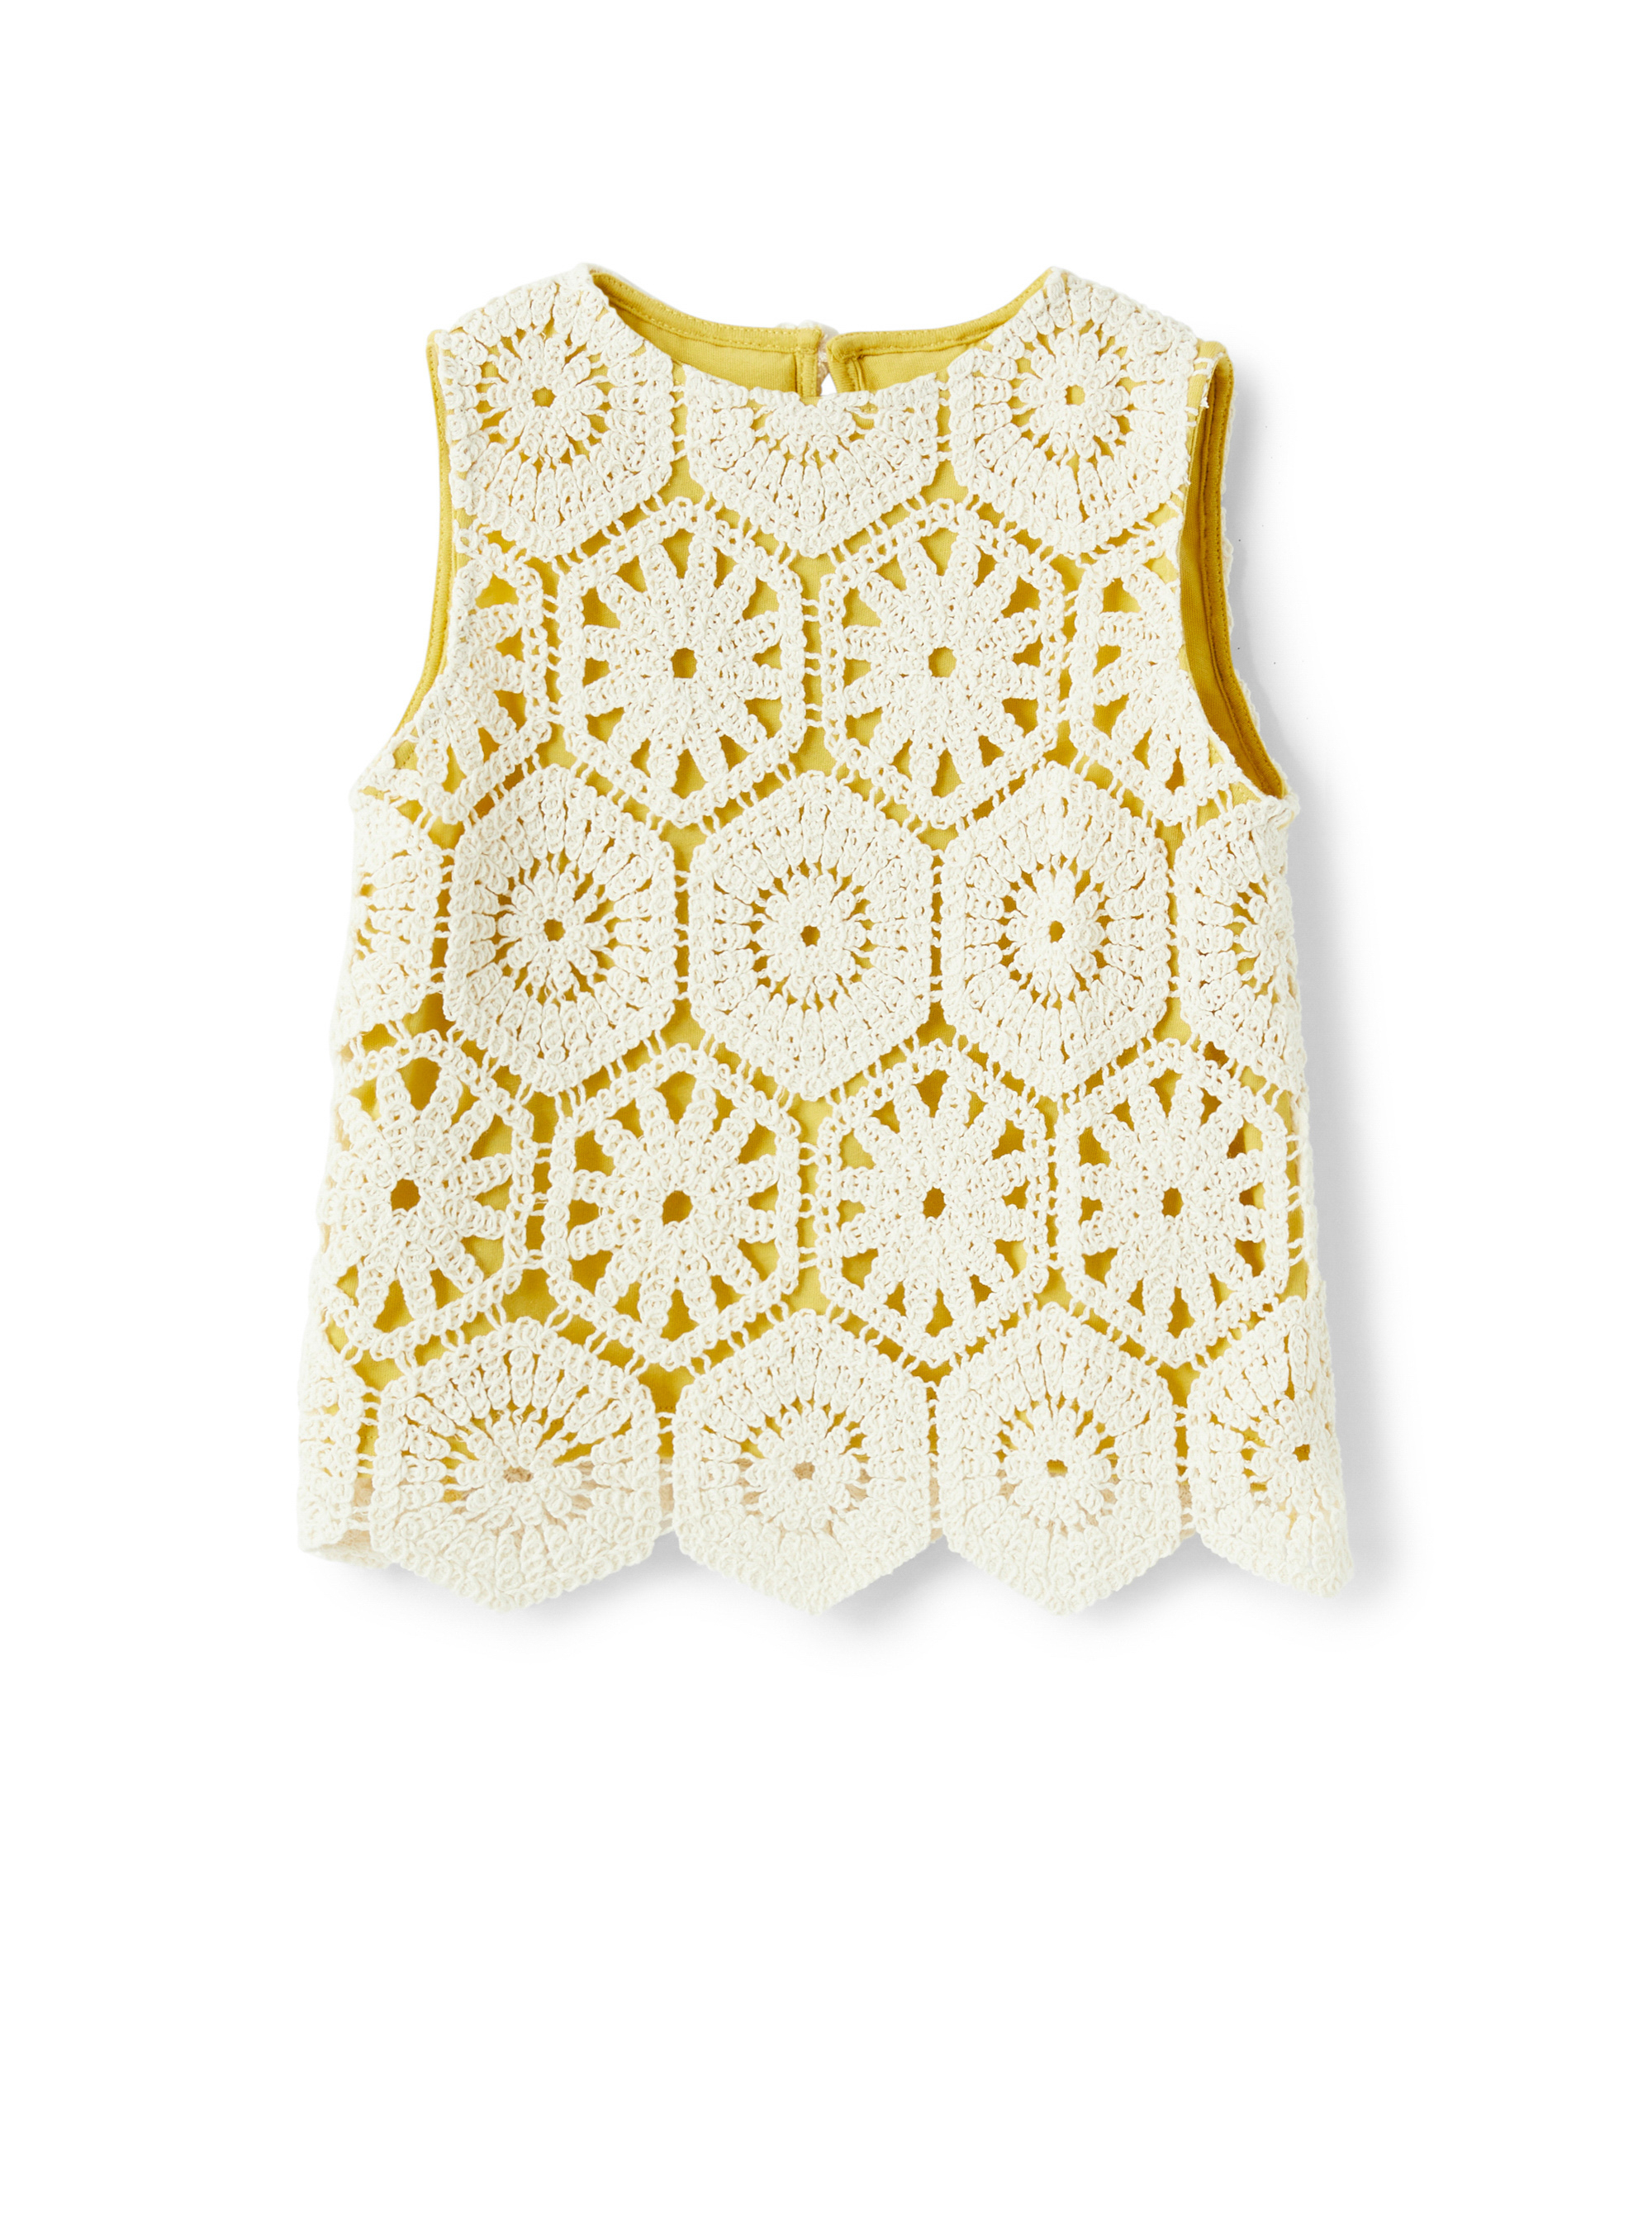 Crochet-effect top lined in contrasting colour - Shirts - Il Gufo